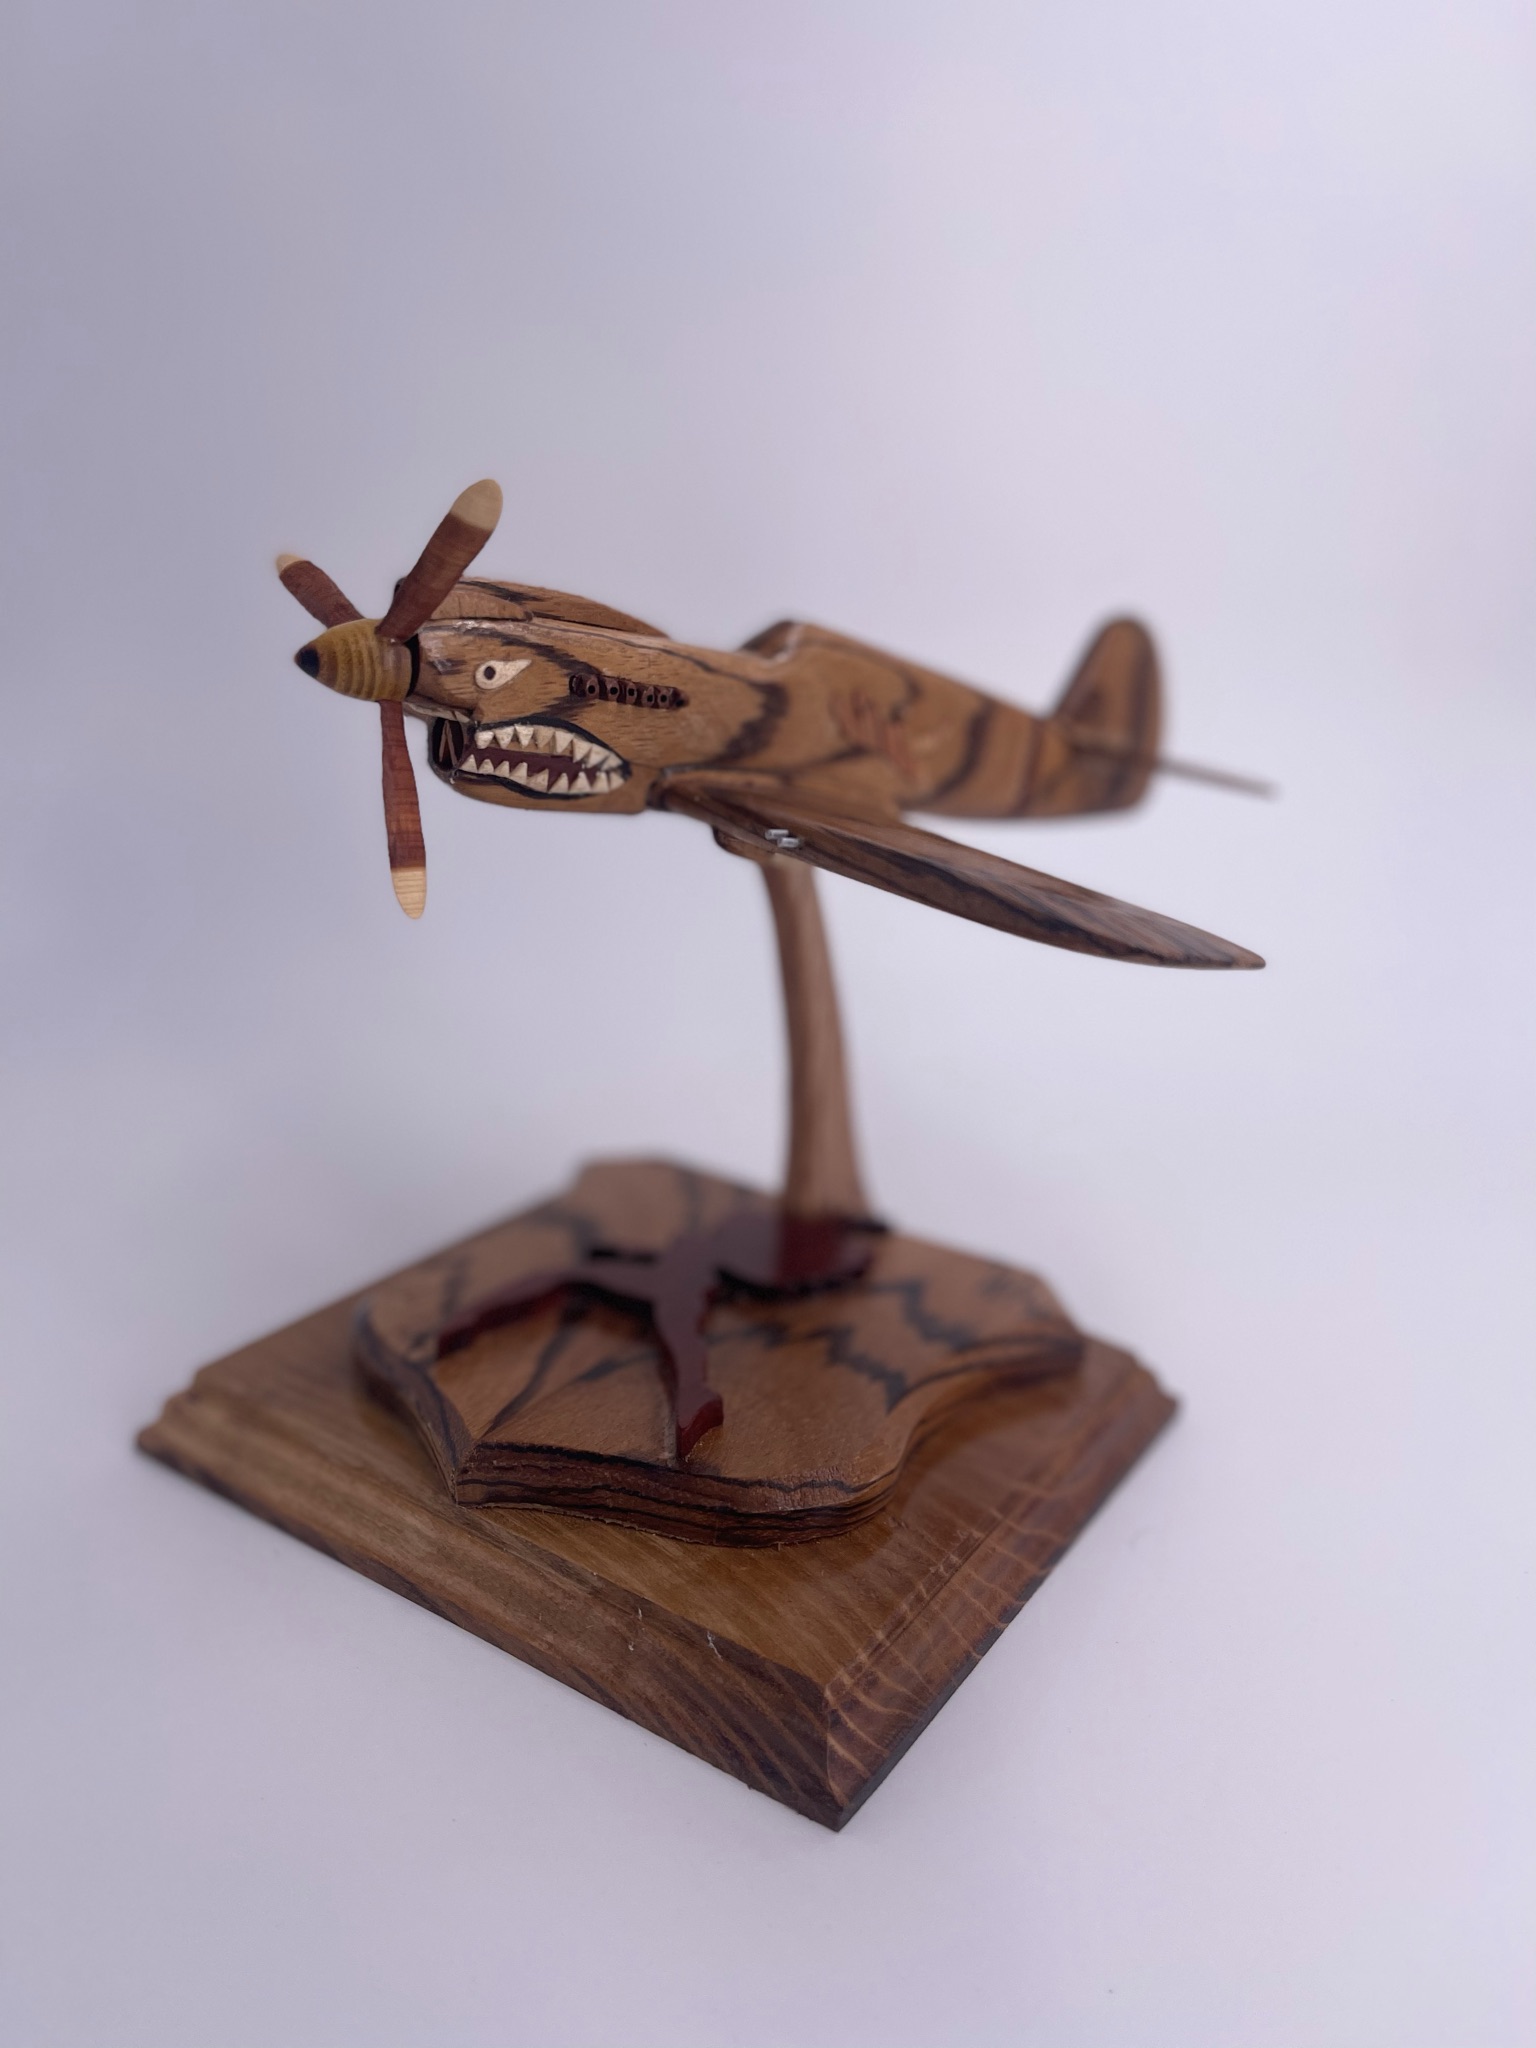 Shark mouth p-40 with fifinella base